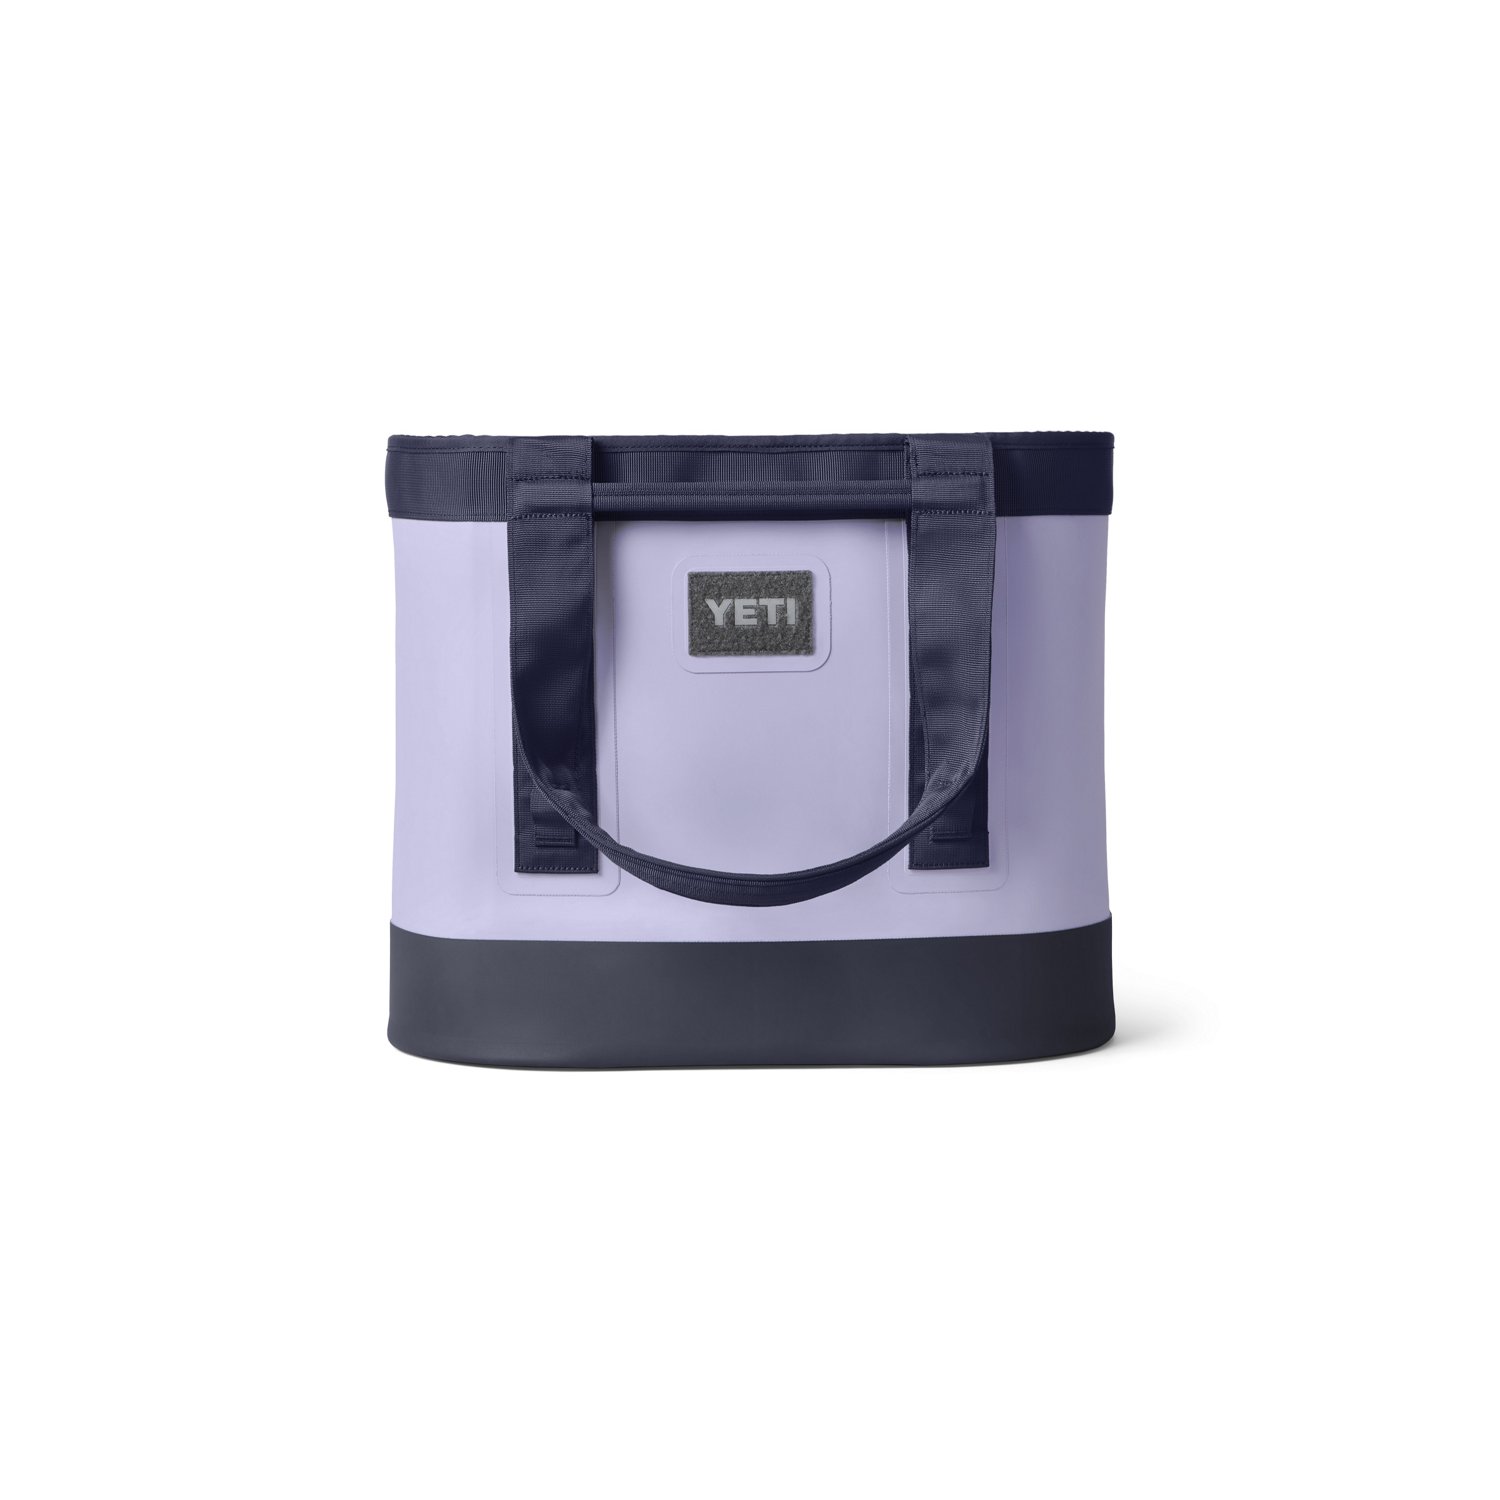 https://academy.scene7.com/is/image/academy//bags---backpacks/yeti-camino-carryall-35-tote-bag-18060131221-purple/3f4dc92563d34e48bf486fed4bdb82db?$pdp-mobile-gallery-ng$